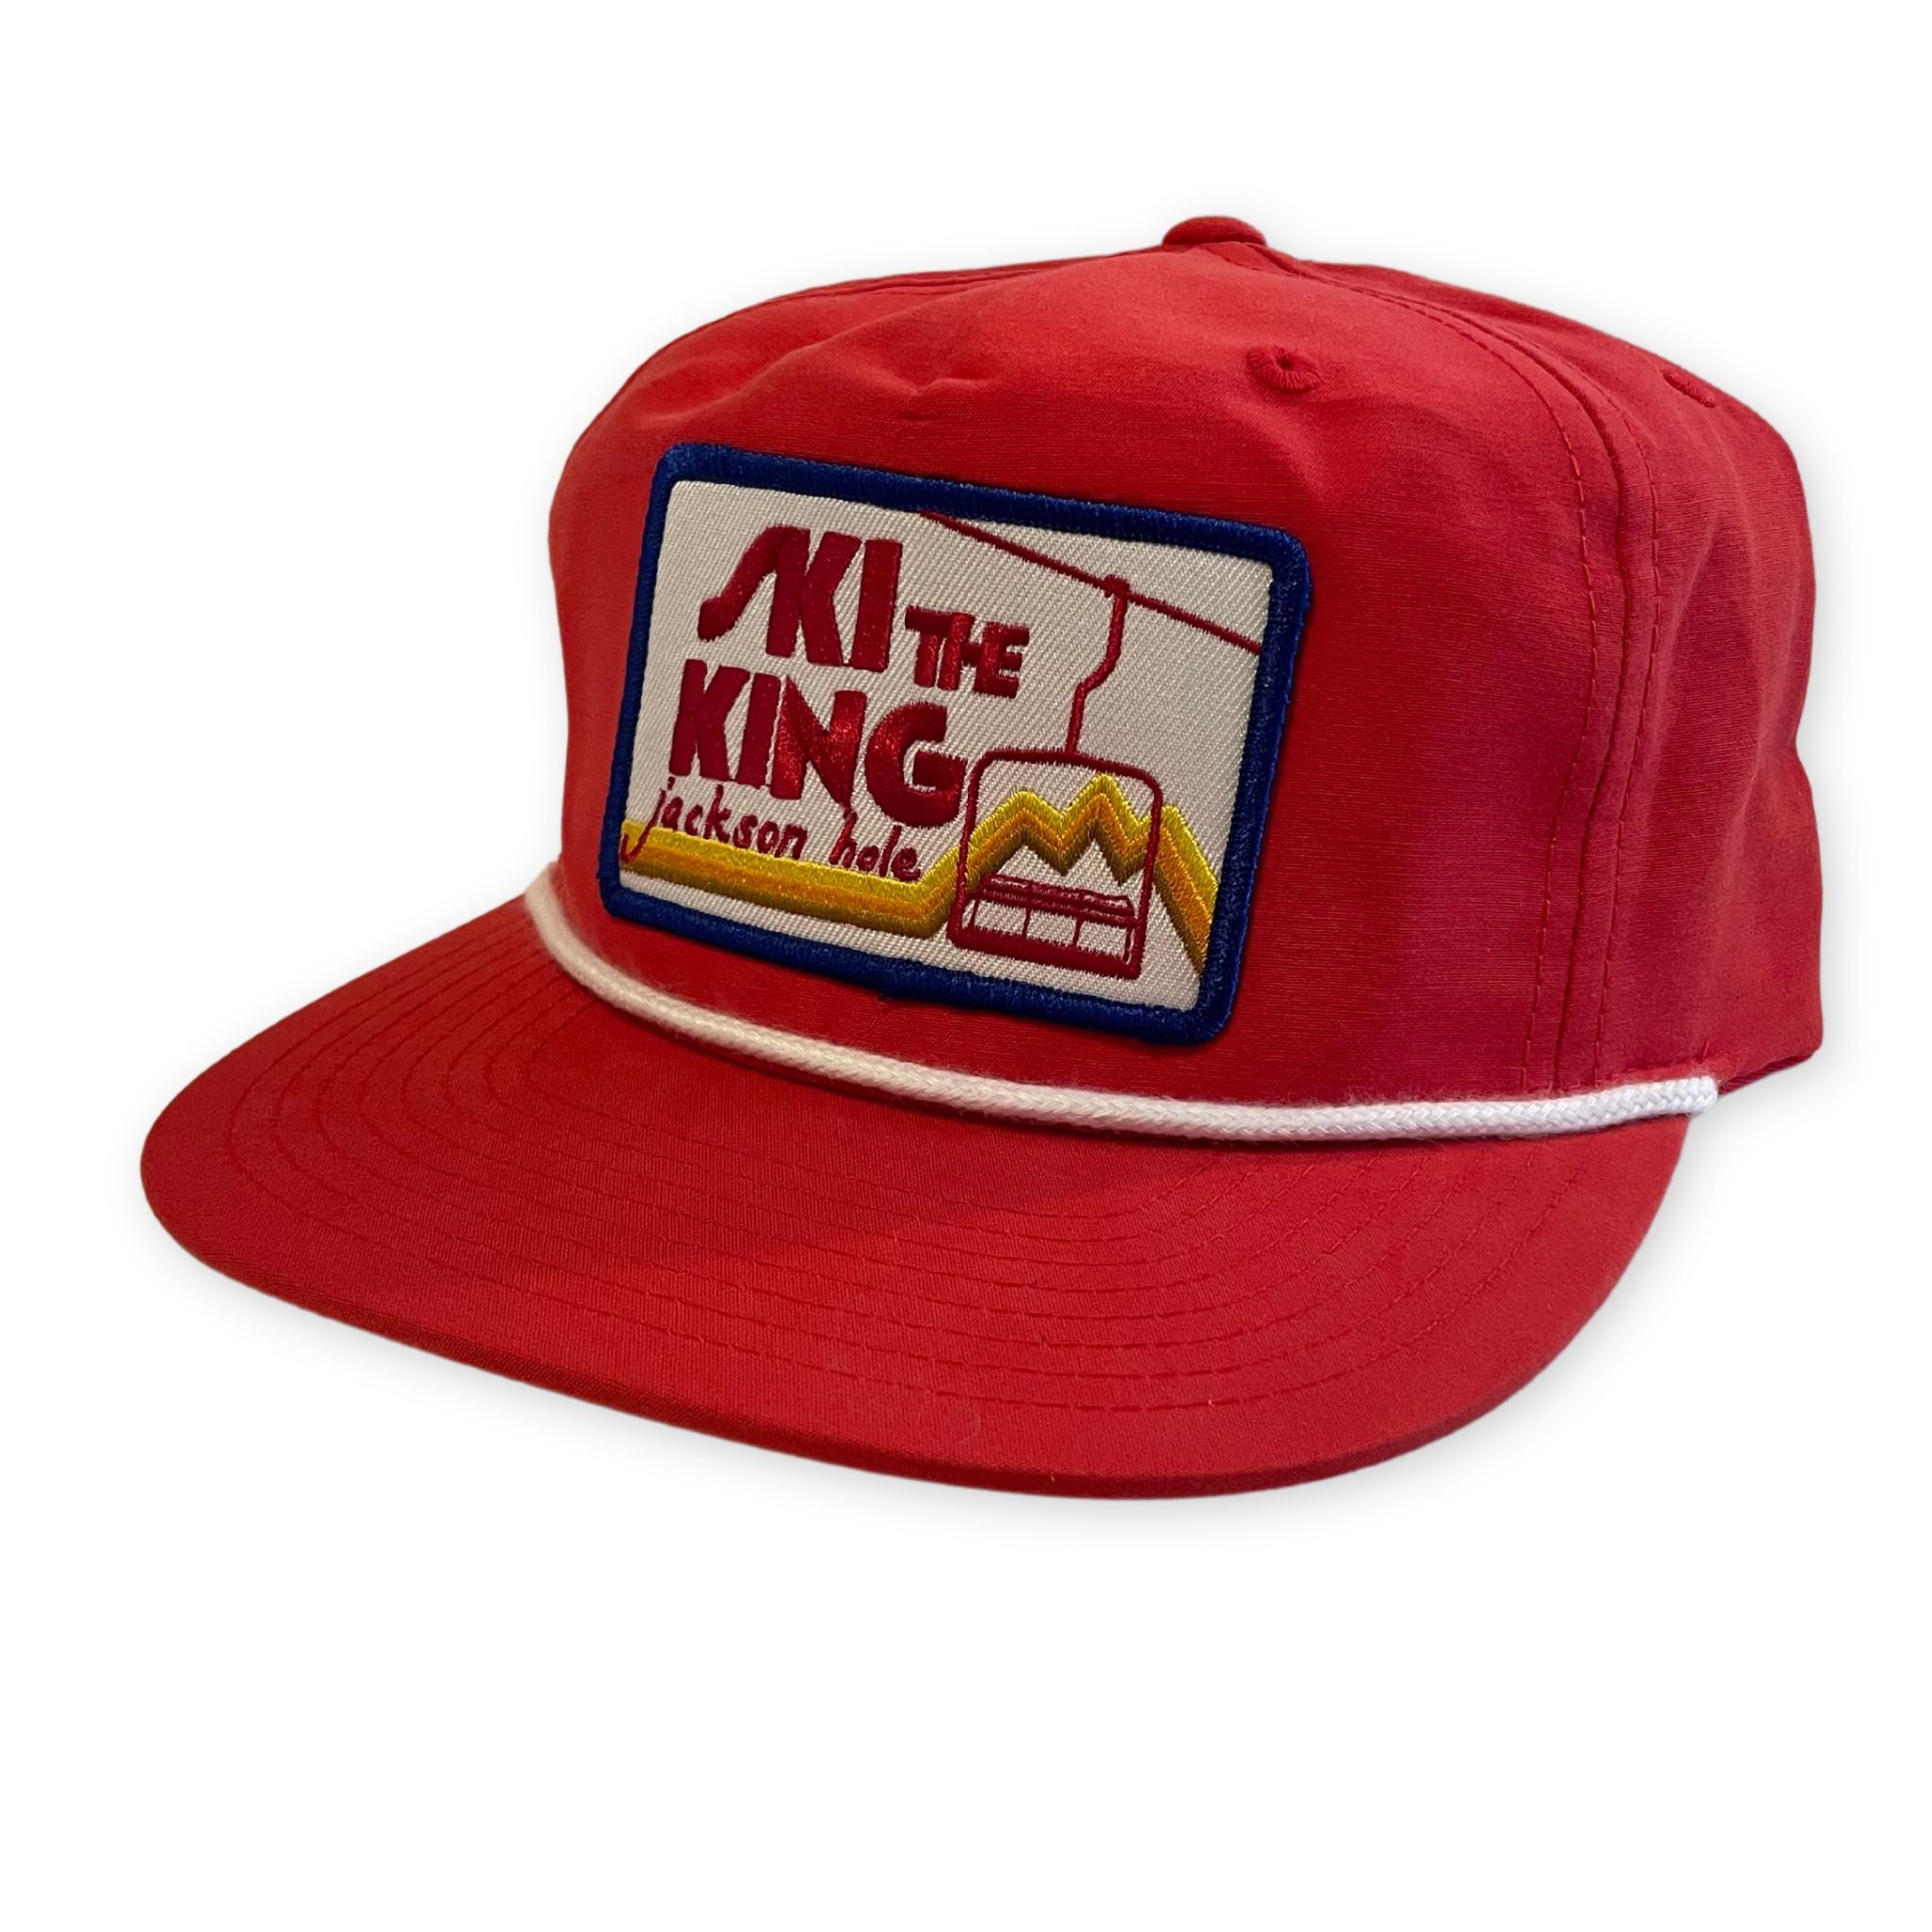 Red Flat Brim Hat with a Ski The King Jackson Hole Patch Hat 